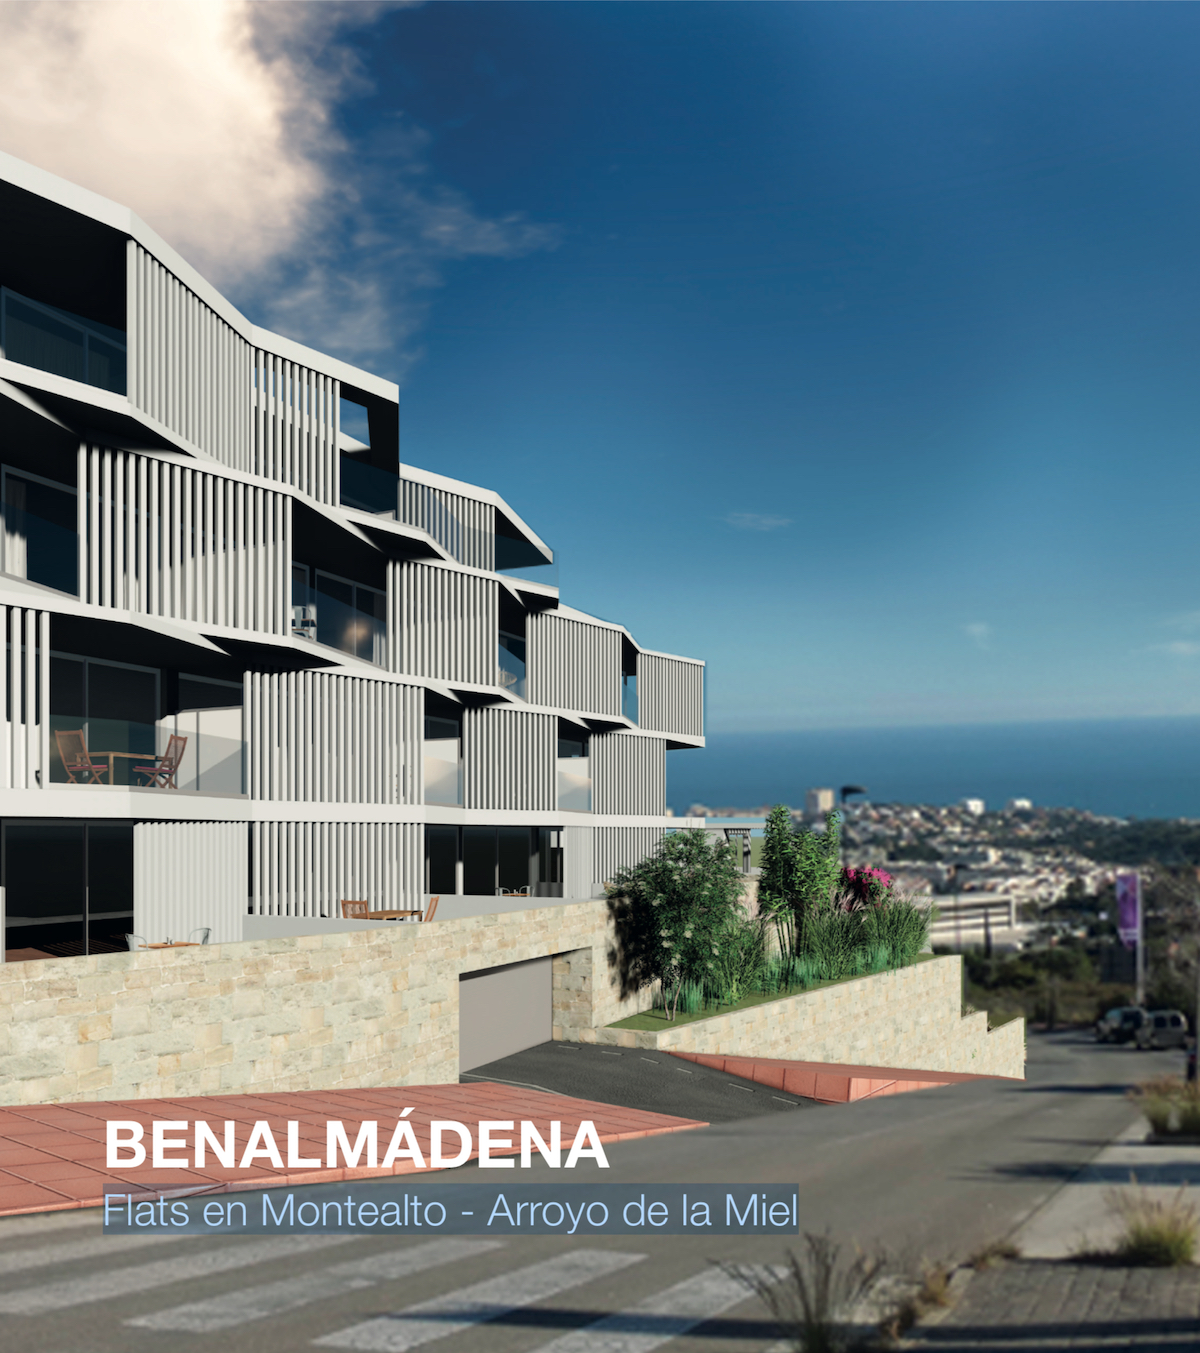 New Development in Benalmadena of apartments and townhouses